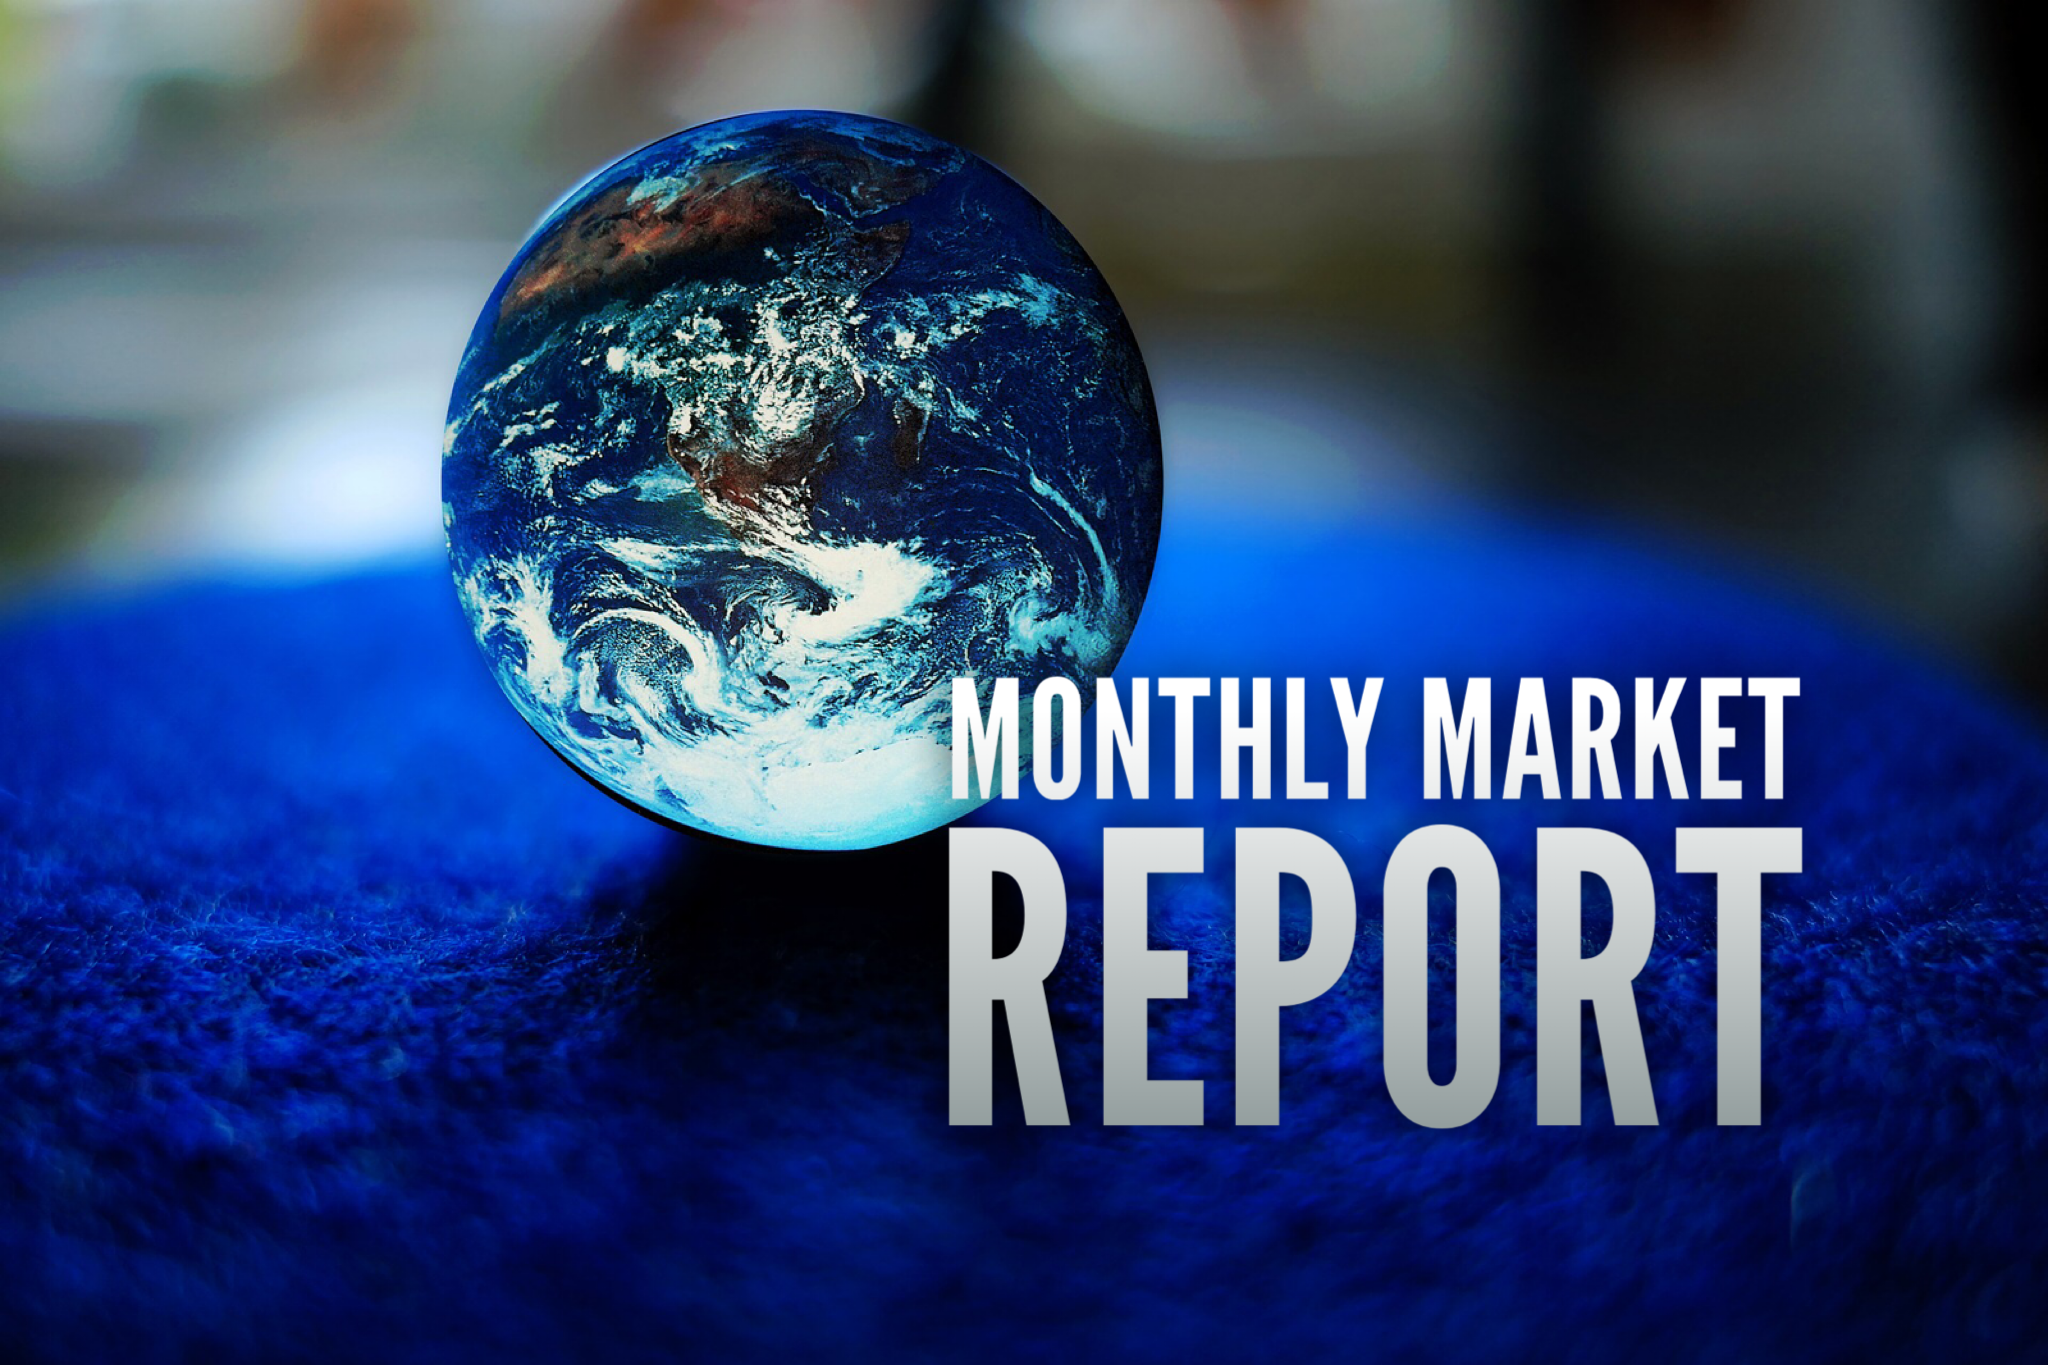 MONTHLY MARKET REPORT: MARCH 2019